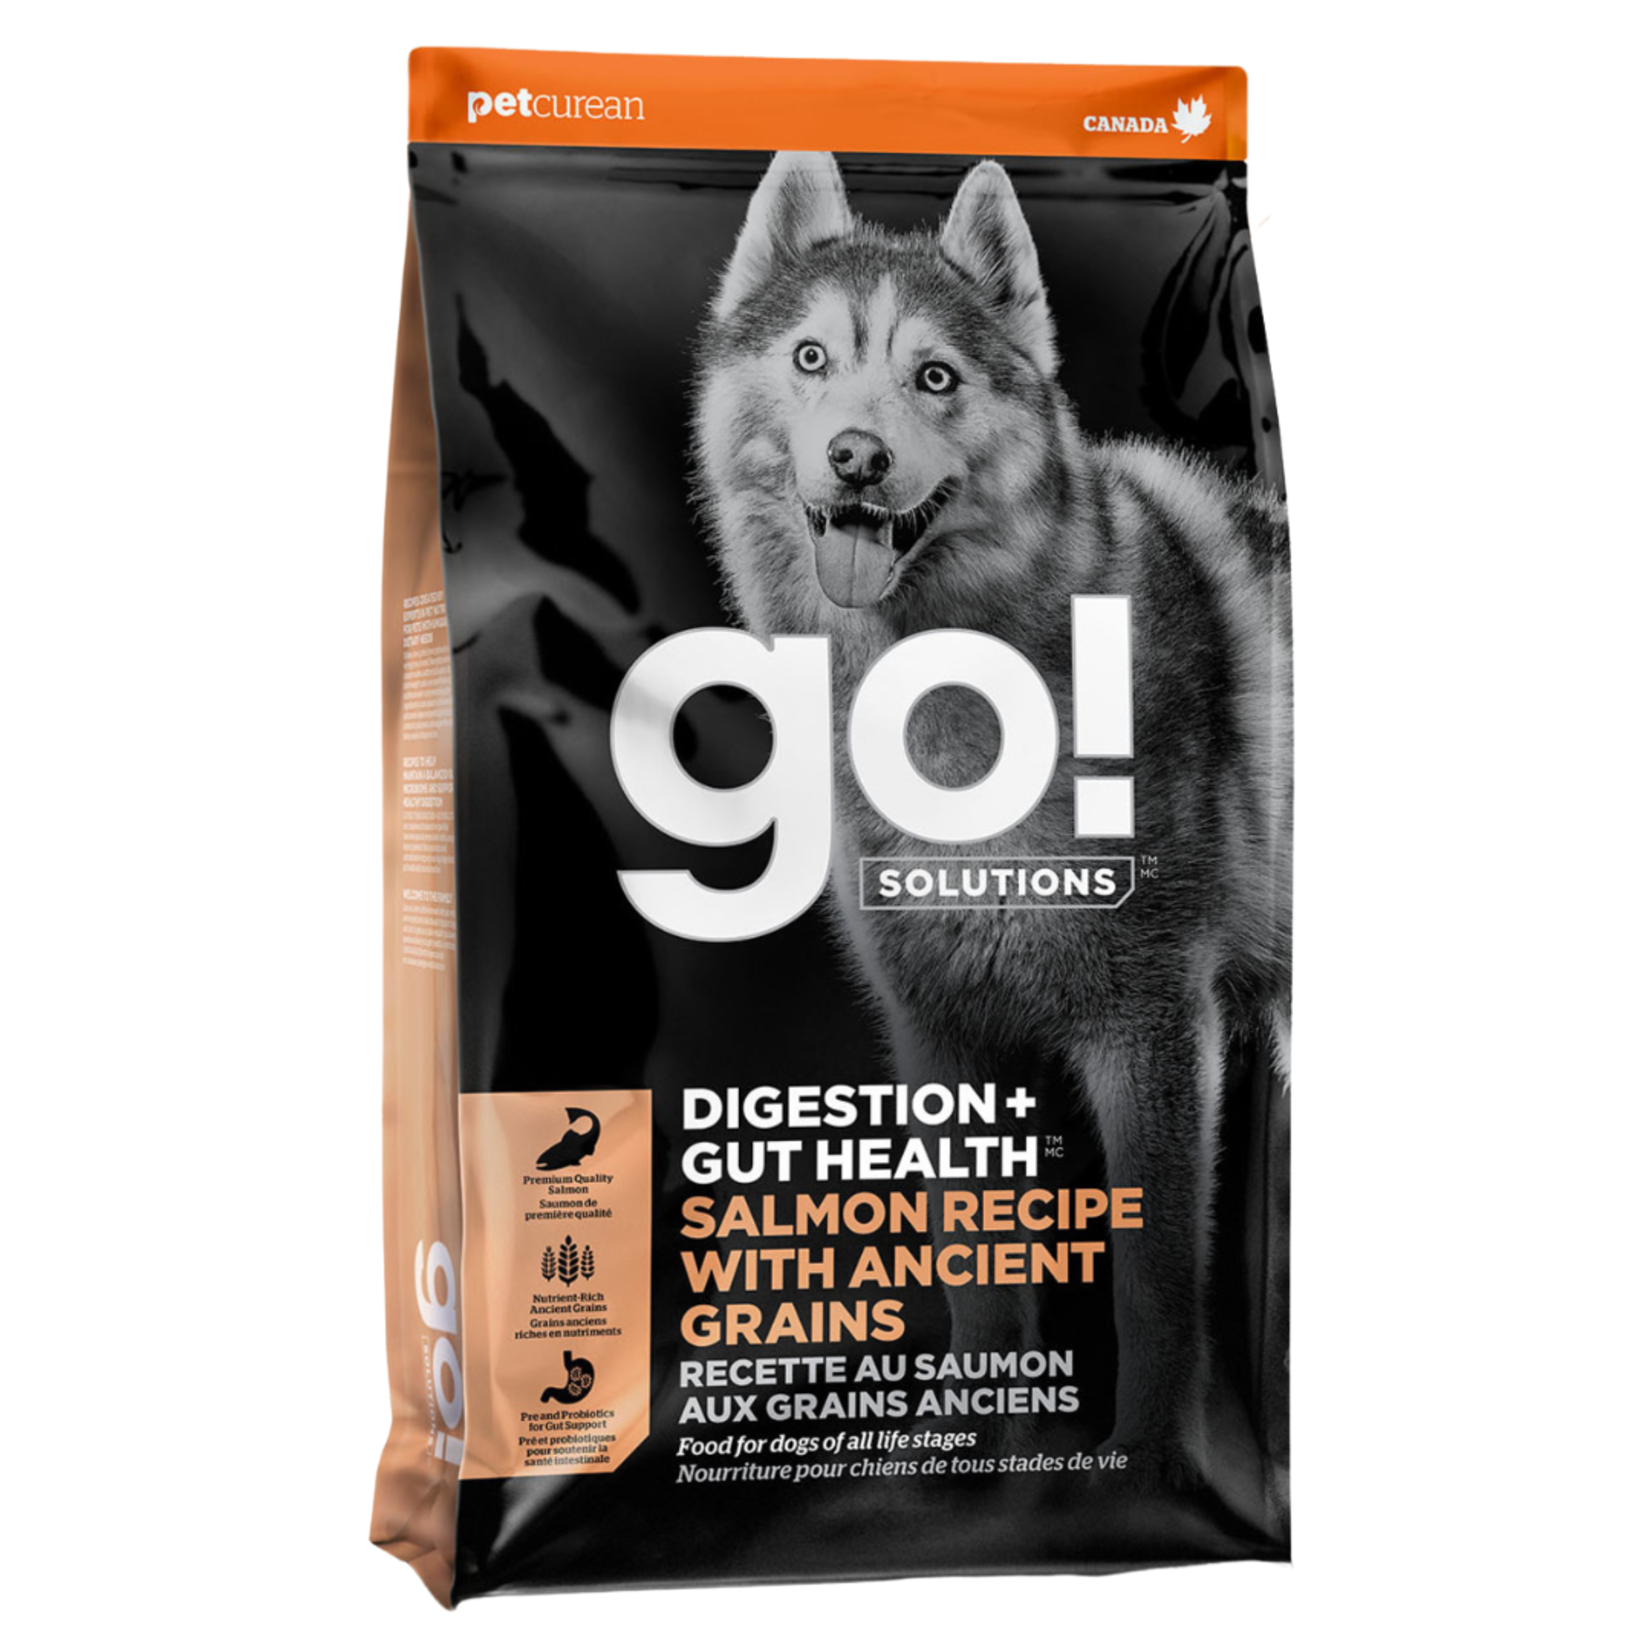 Go! go! dog digestion and gut health Salmon & Ancient grains recipe